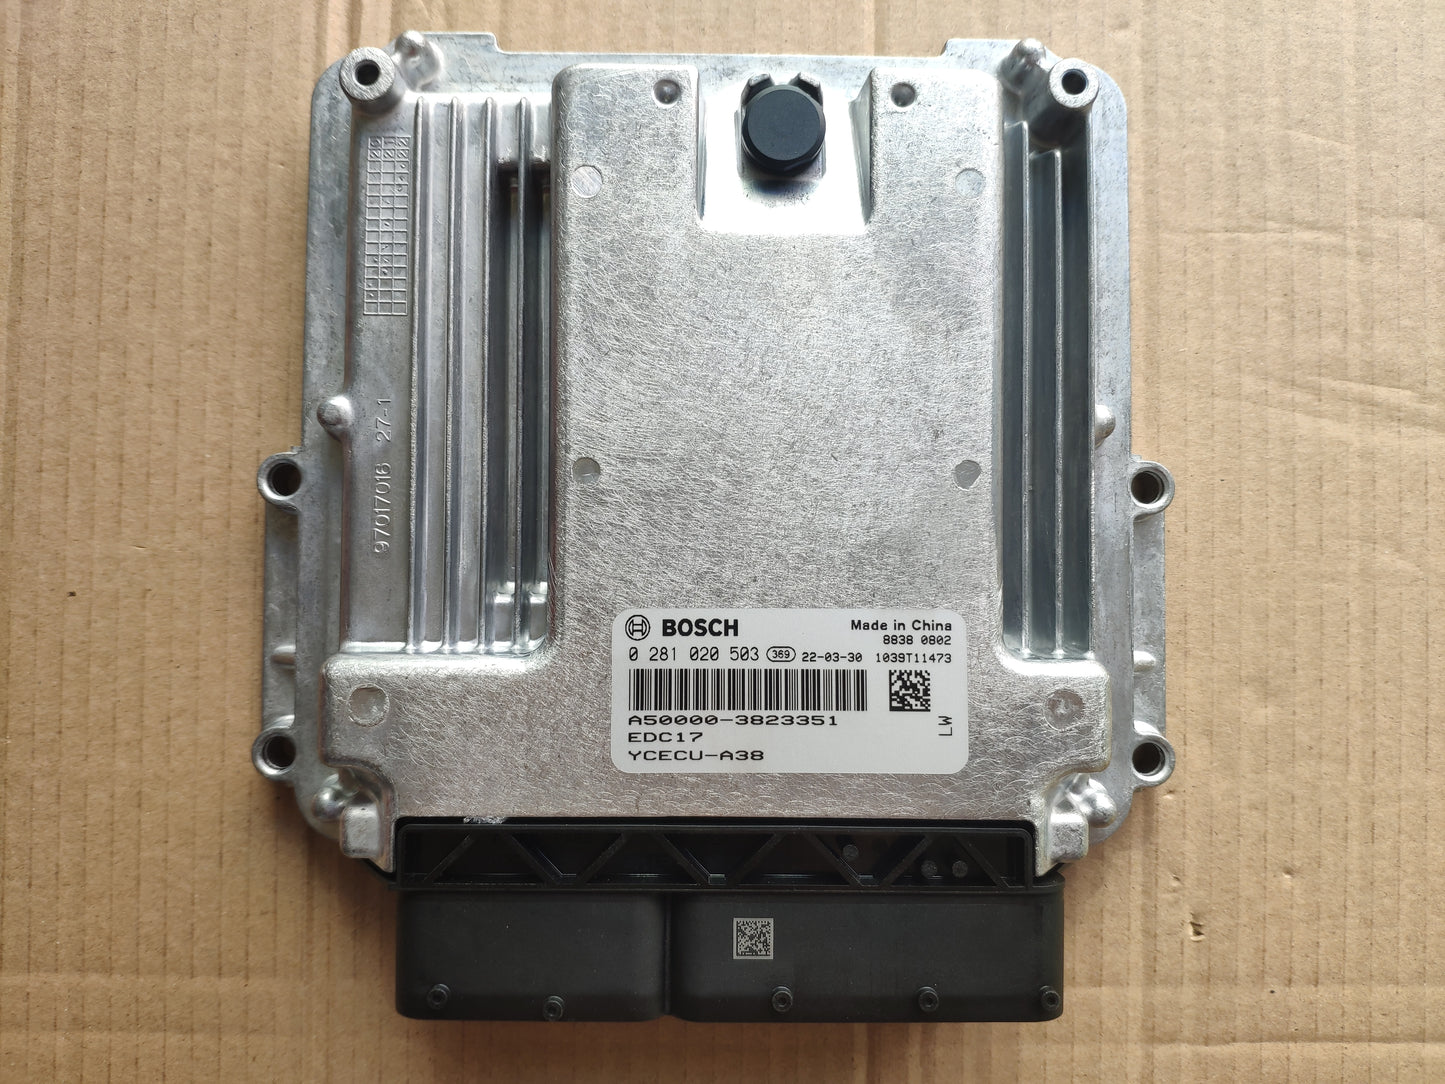 OEM: 0281020503 A50000-3823351 EDC17 YCECU-A38 Material: Metal Color: Silver Origin: Made in China Weight: 1500g Packing List: 1*  ECU Diesel Engine  More Service We can provide OEM Manufacturing service We can Be your one-step solution for Auto Parts We can provide technical scheme for you  Feel Free to Contact Us, We will get back to you as soon as possible.